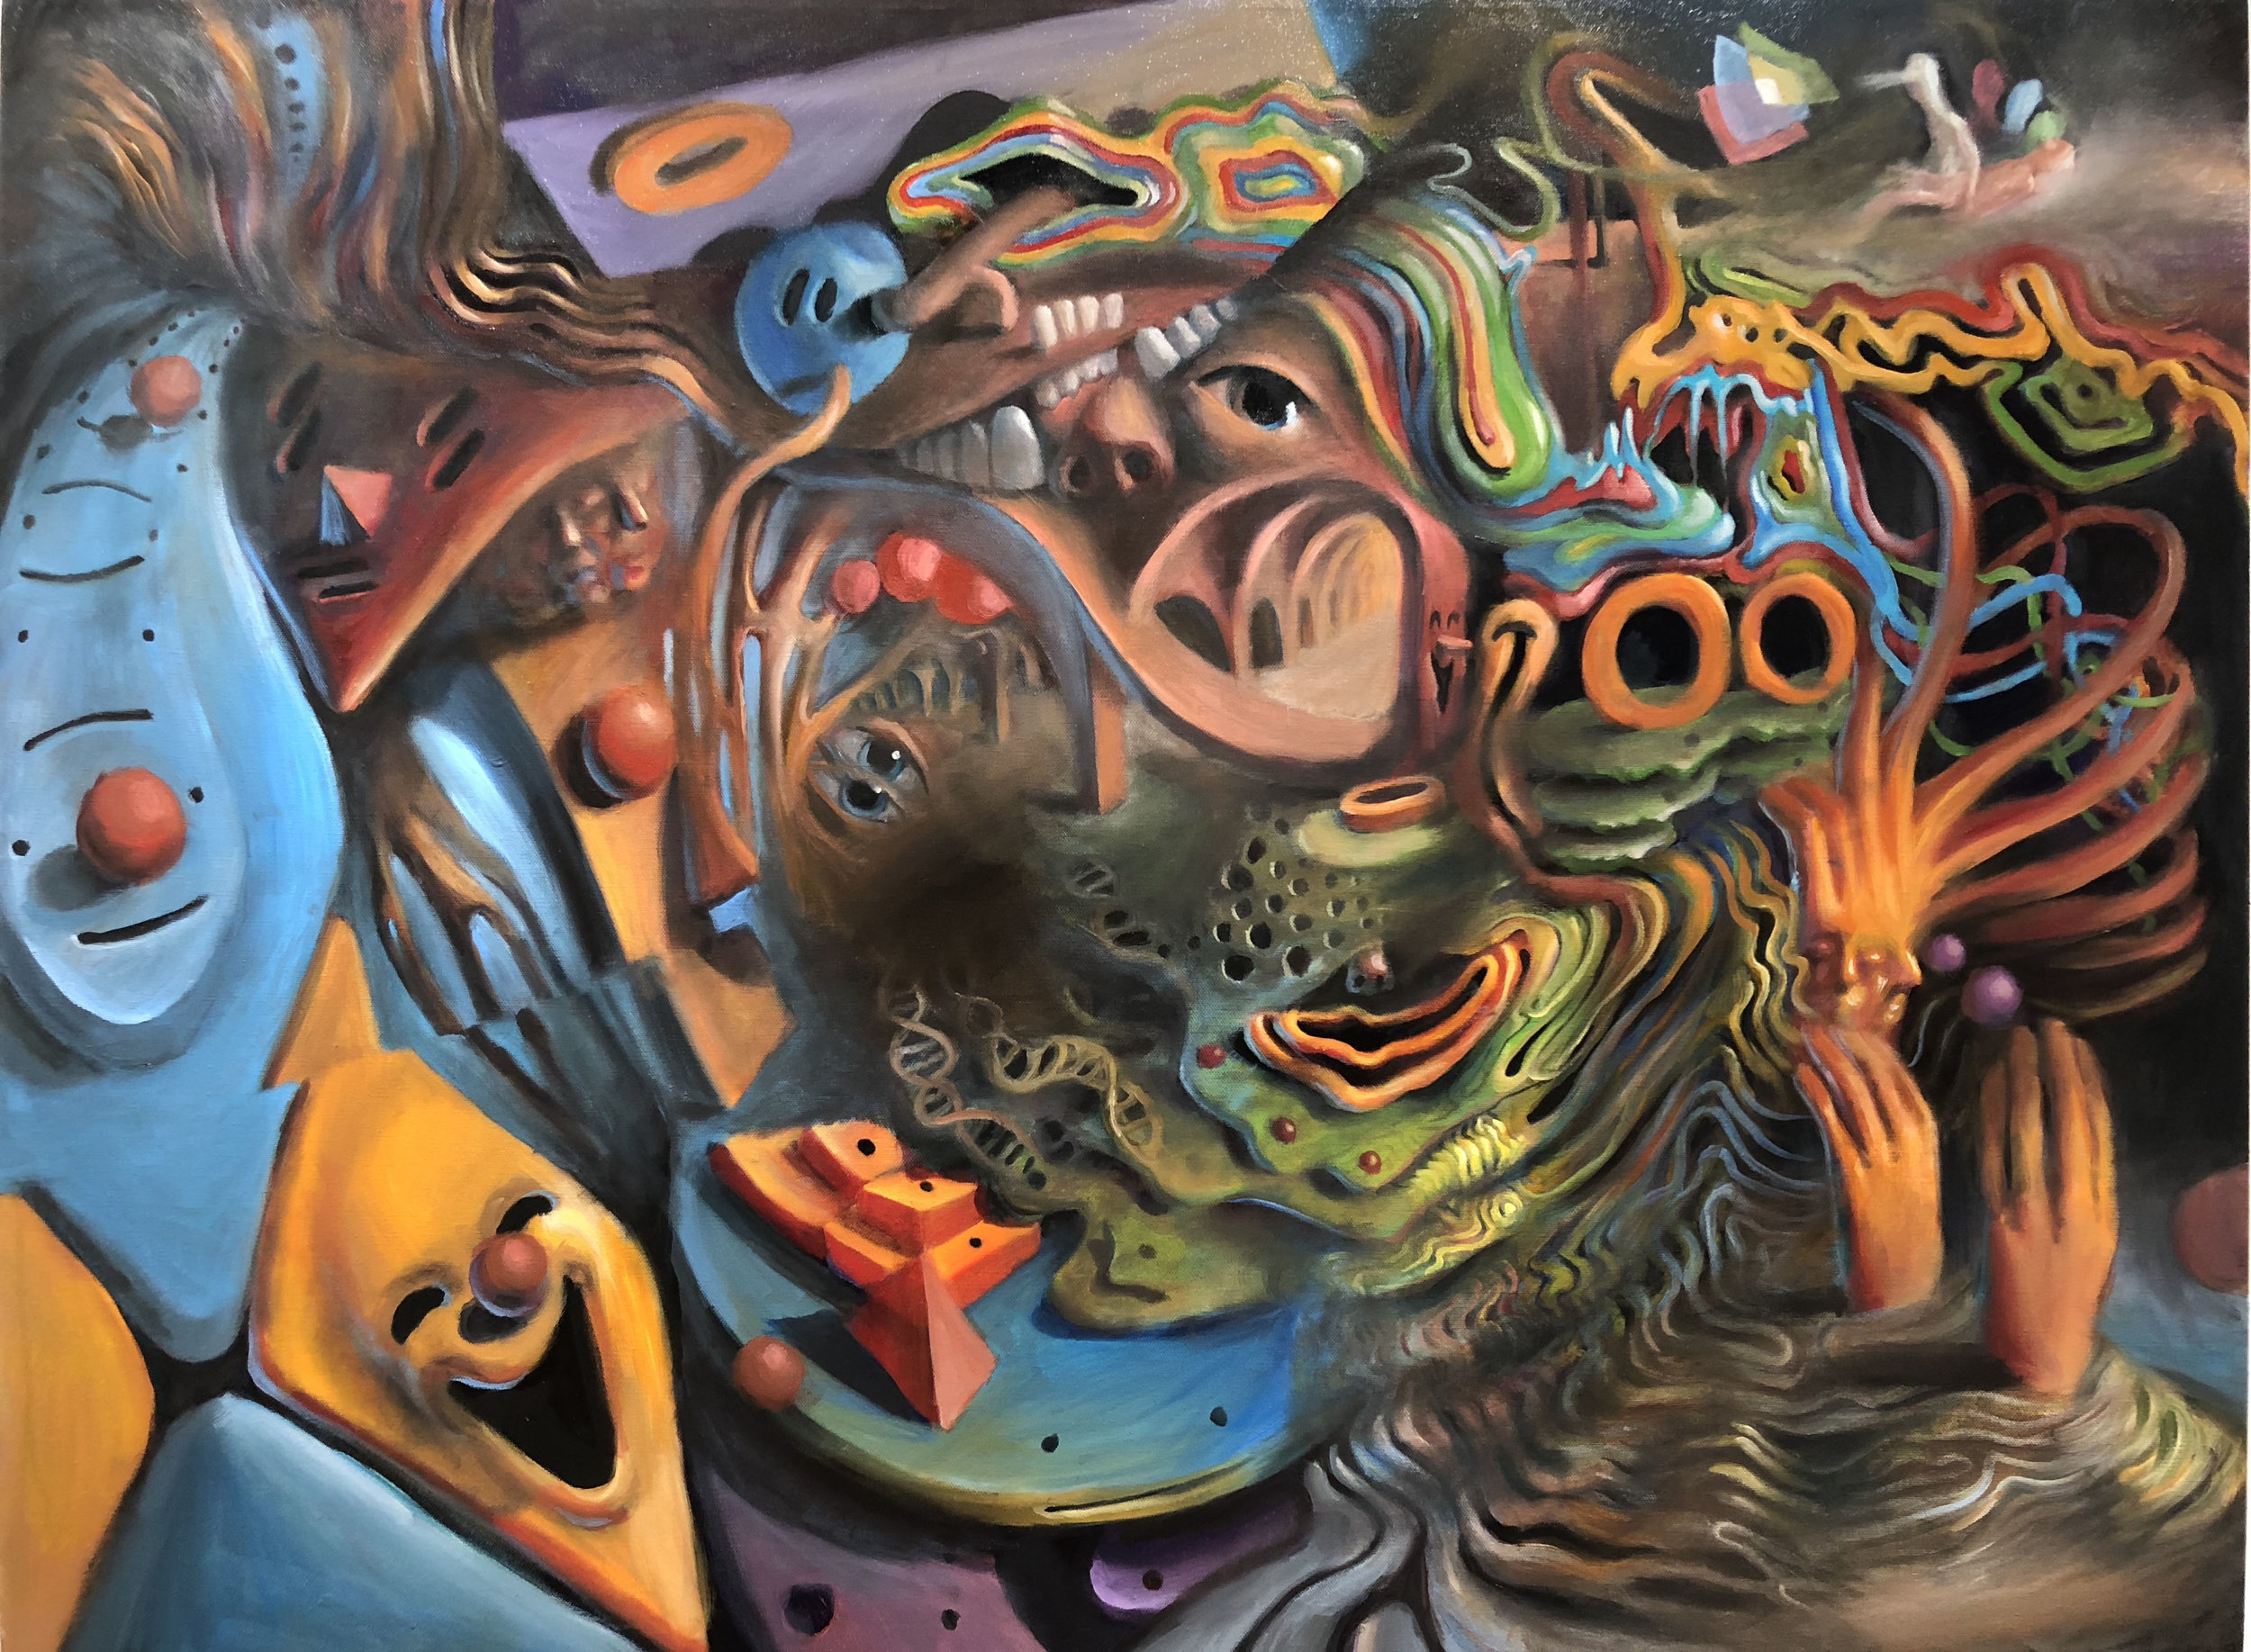   Cosmic Carnival , oil on canvas, 42”x30” 